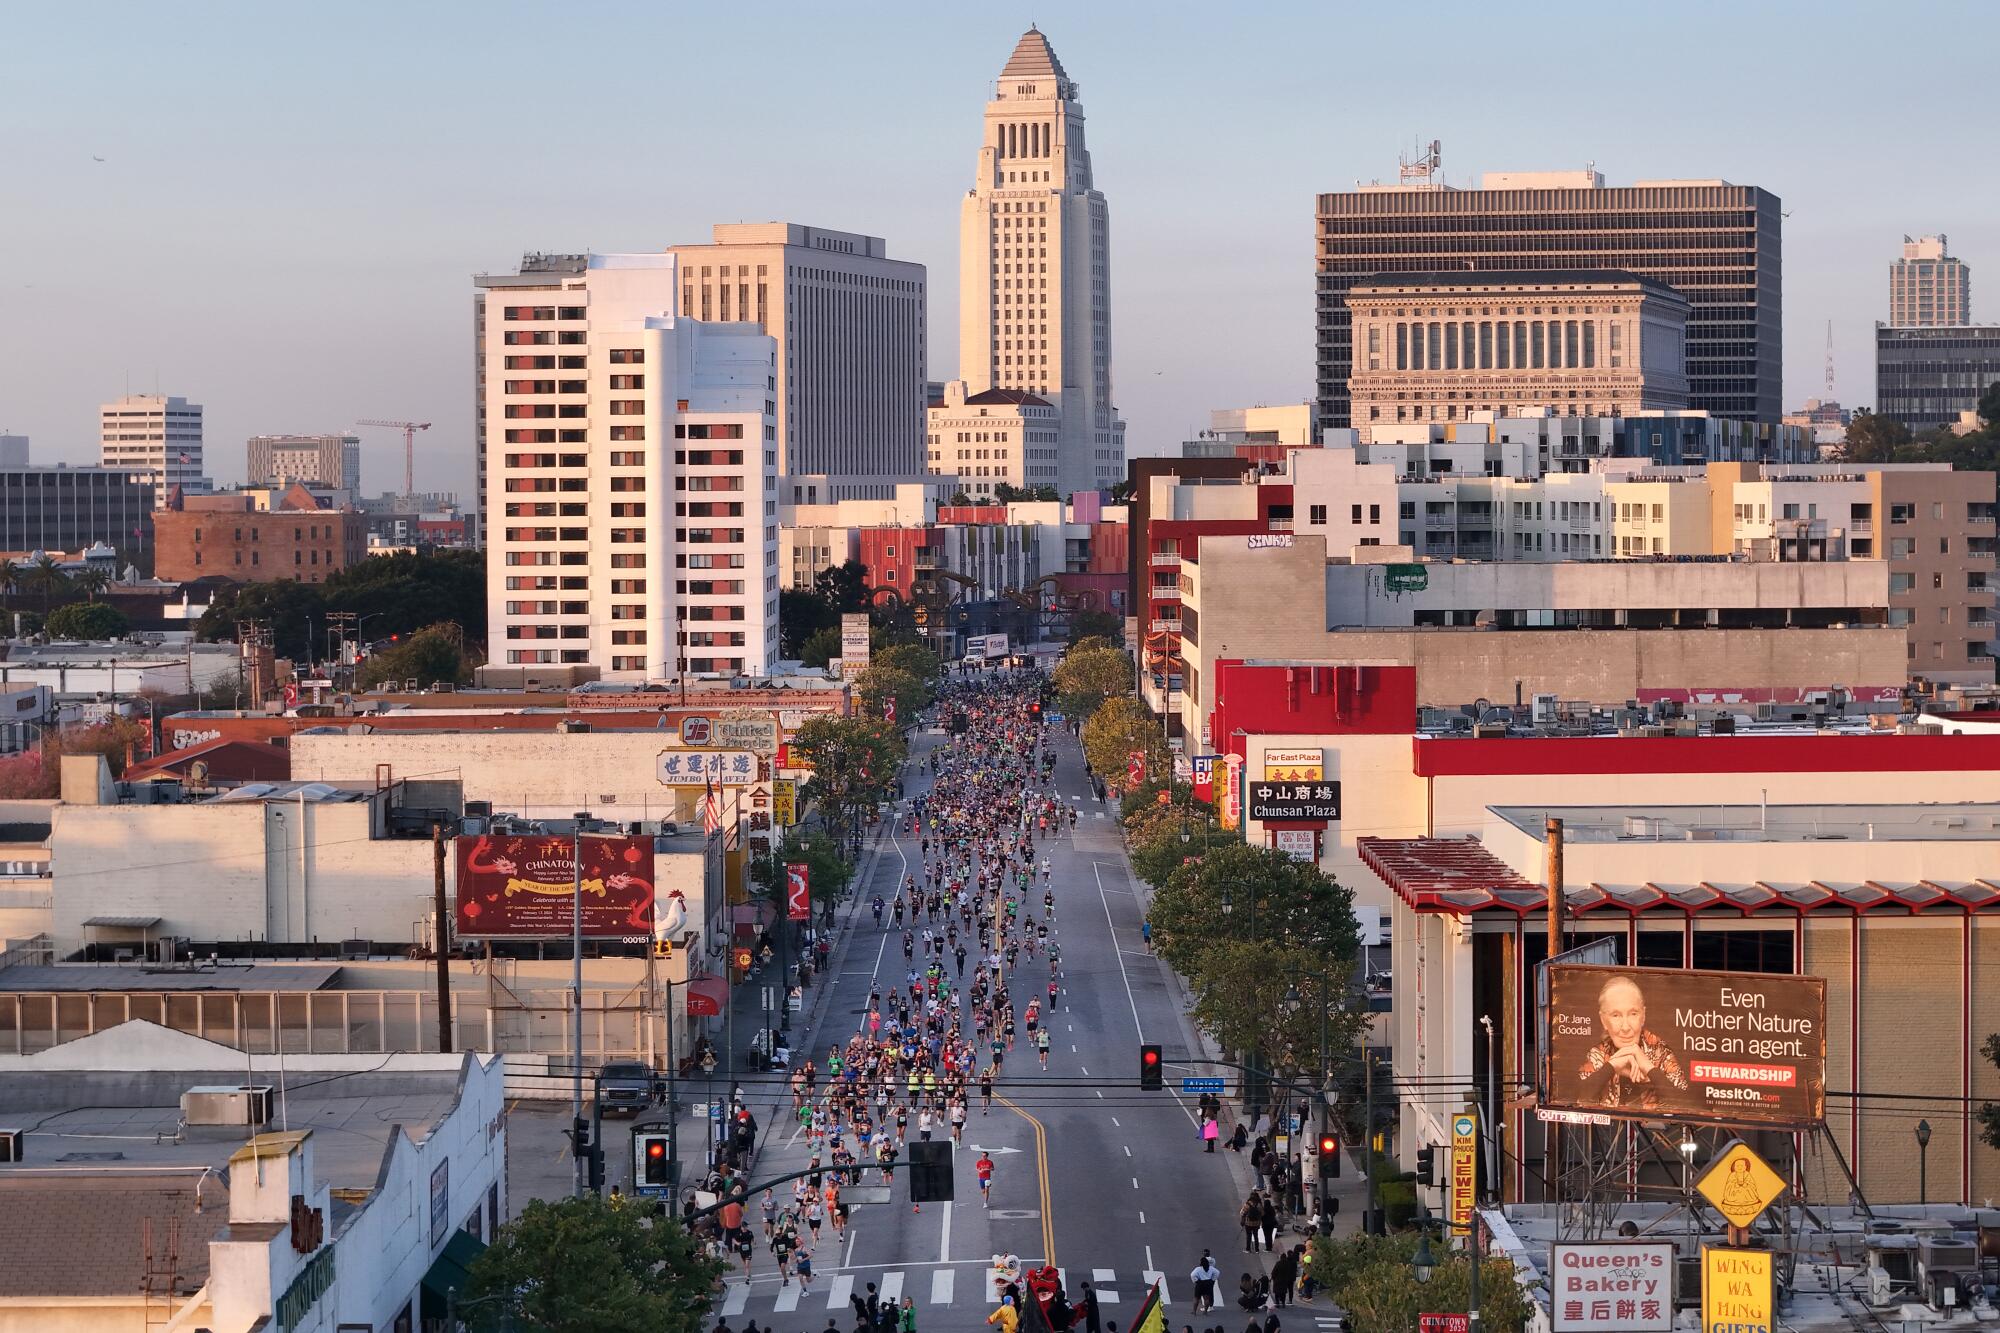 The LA Marathon makes its way onto Broadway in Chinatown at the two-mile mark on Sunday.